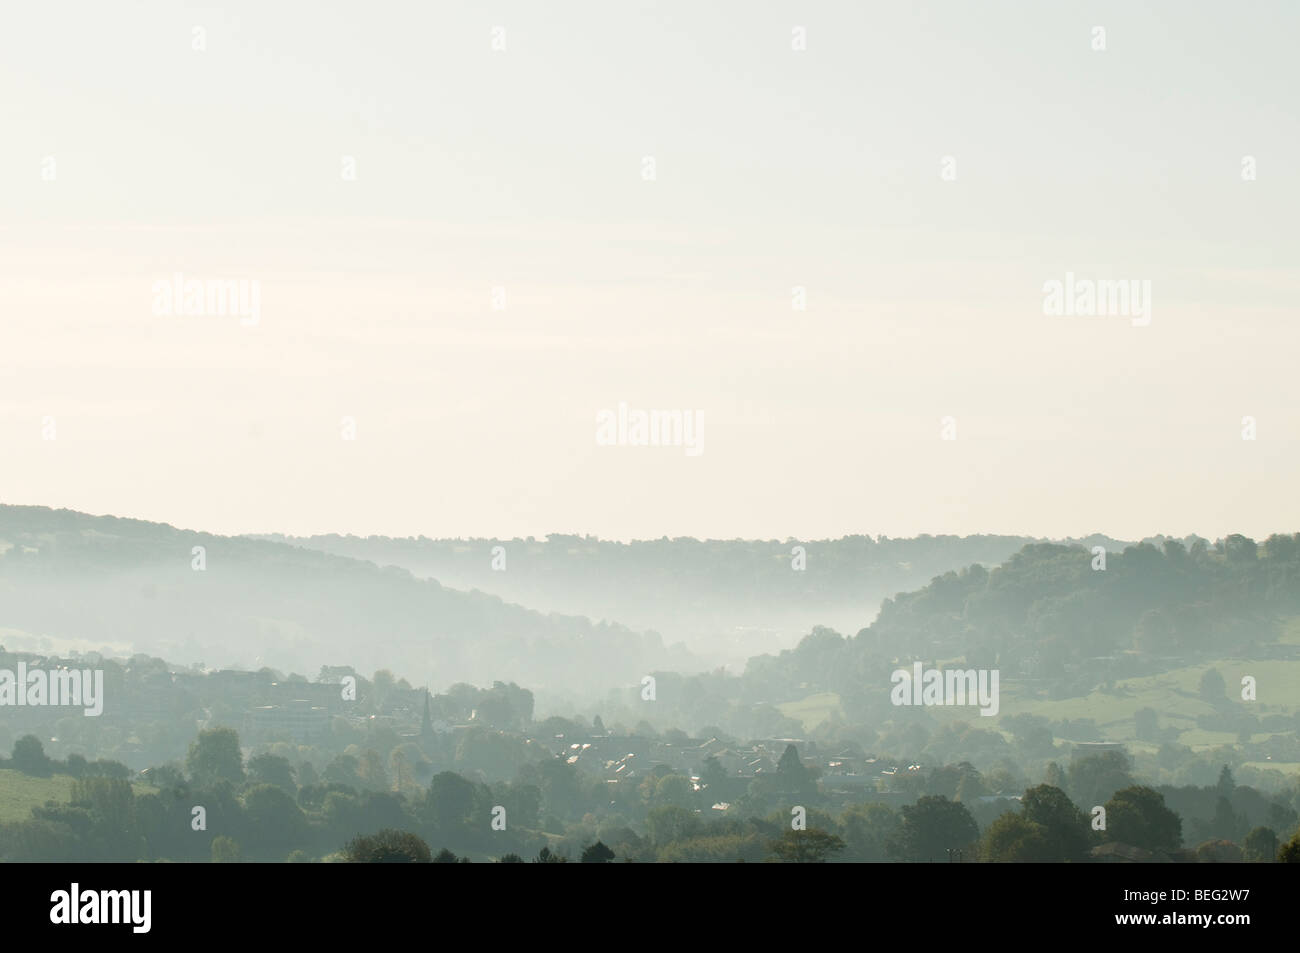 Stroud town from a distance shrouded in early morning mists Stock Photo